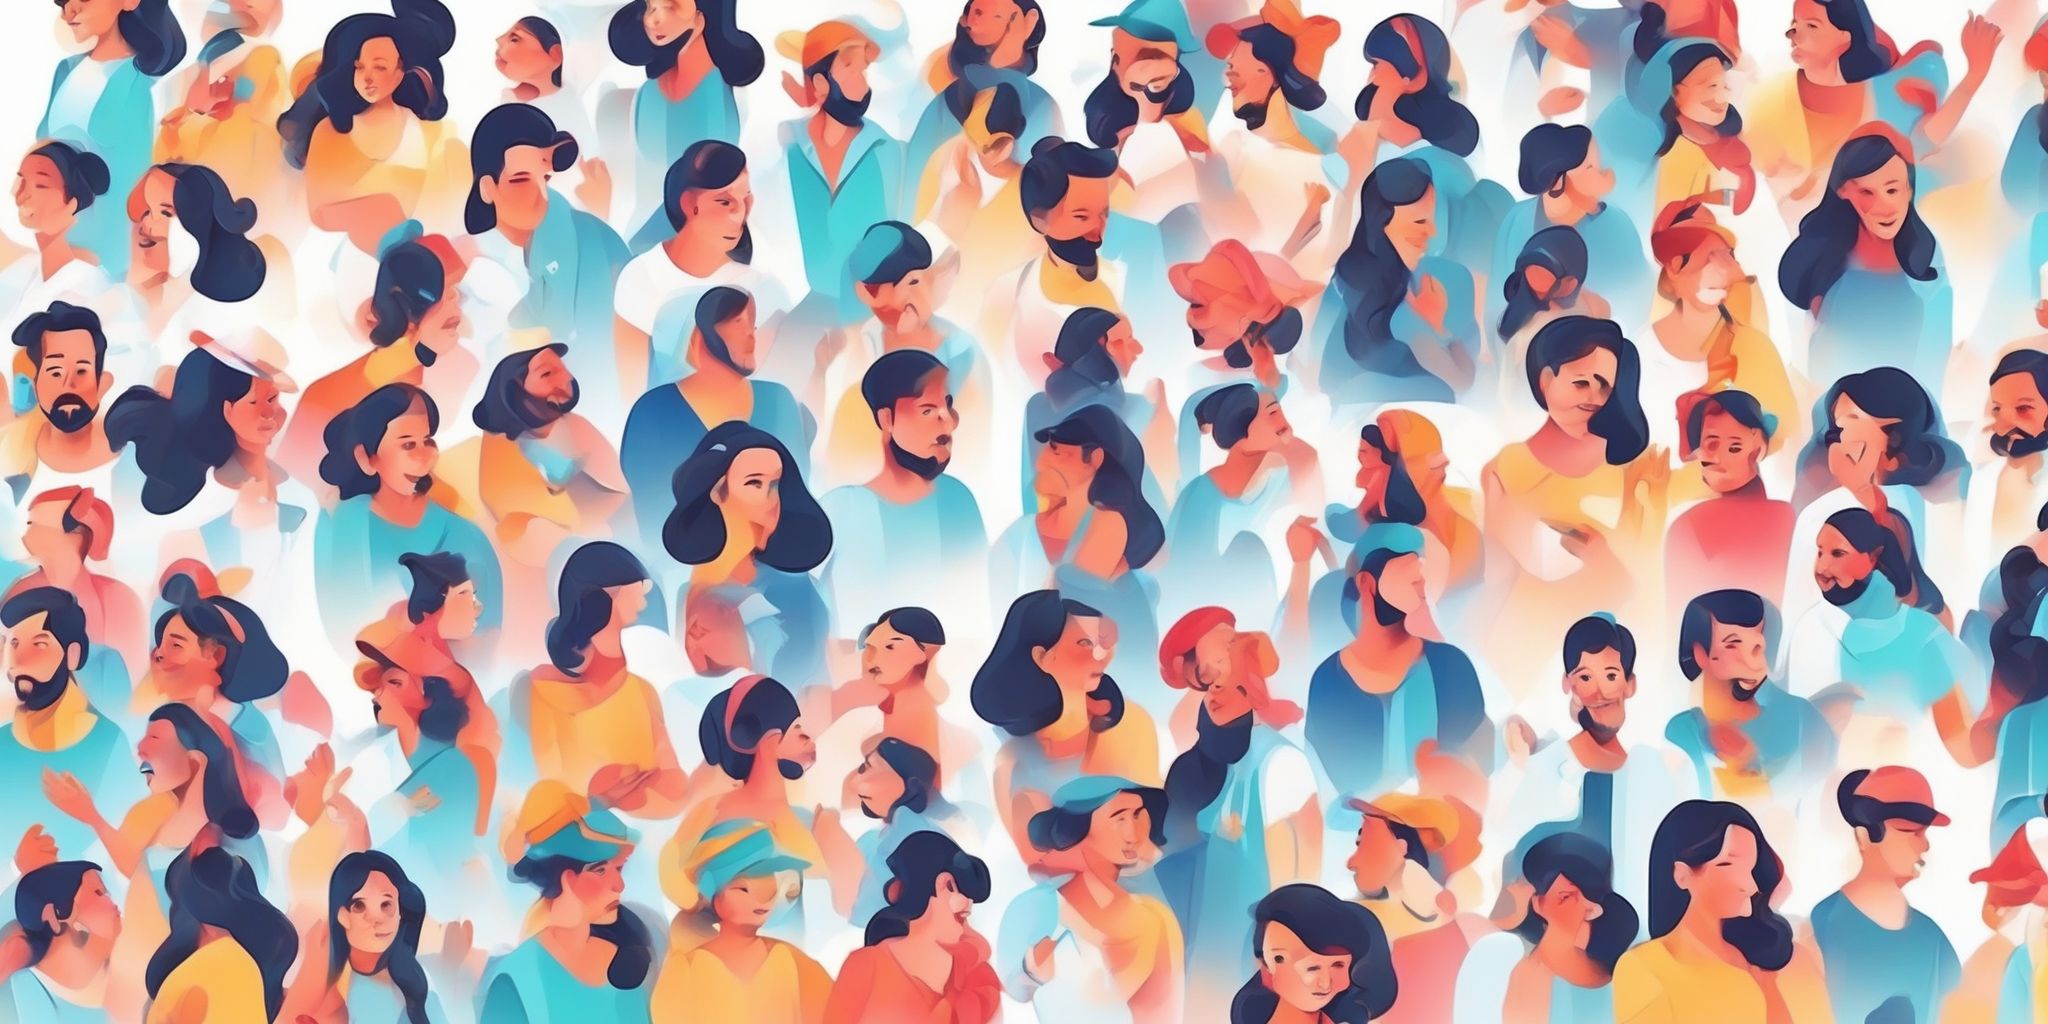 Follower count in illustration style with gradients and white background